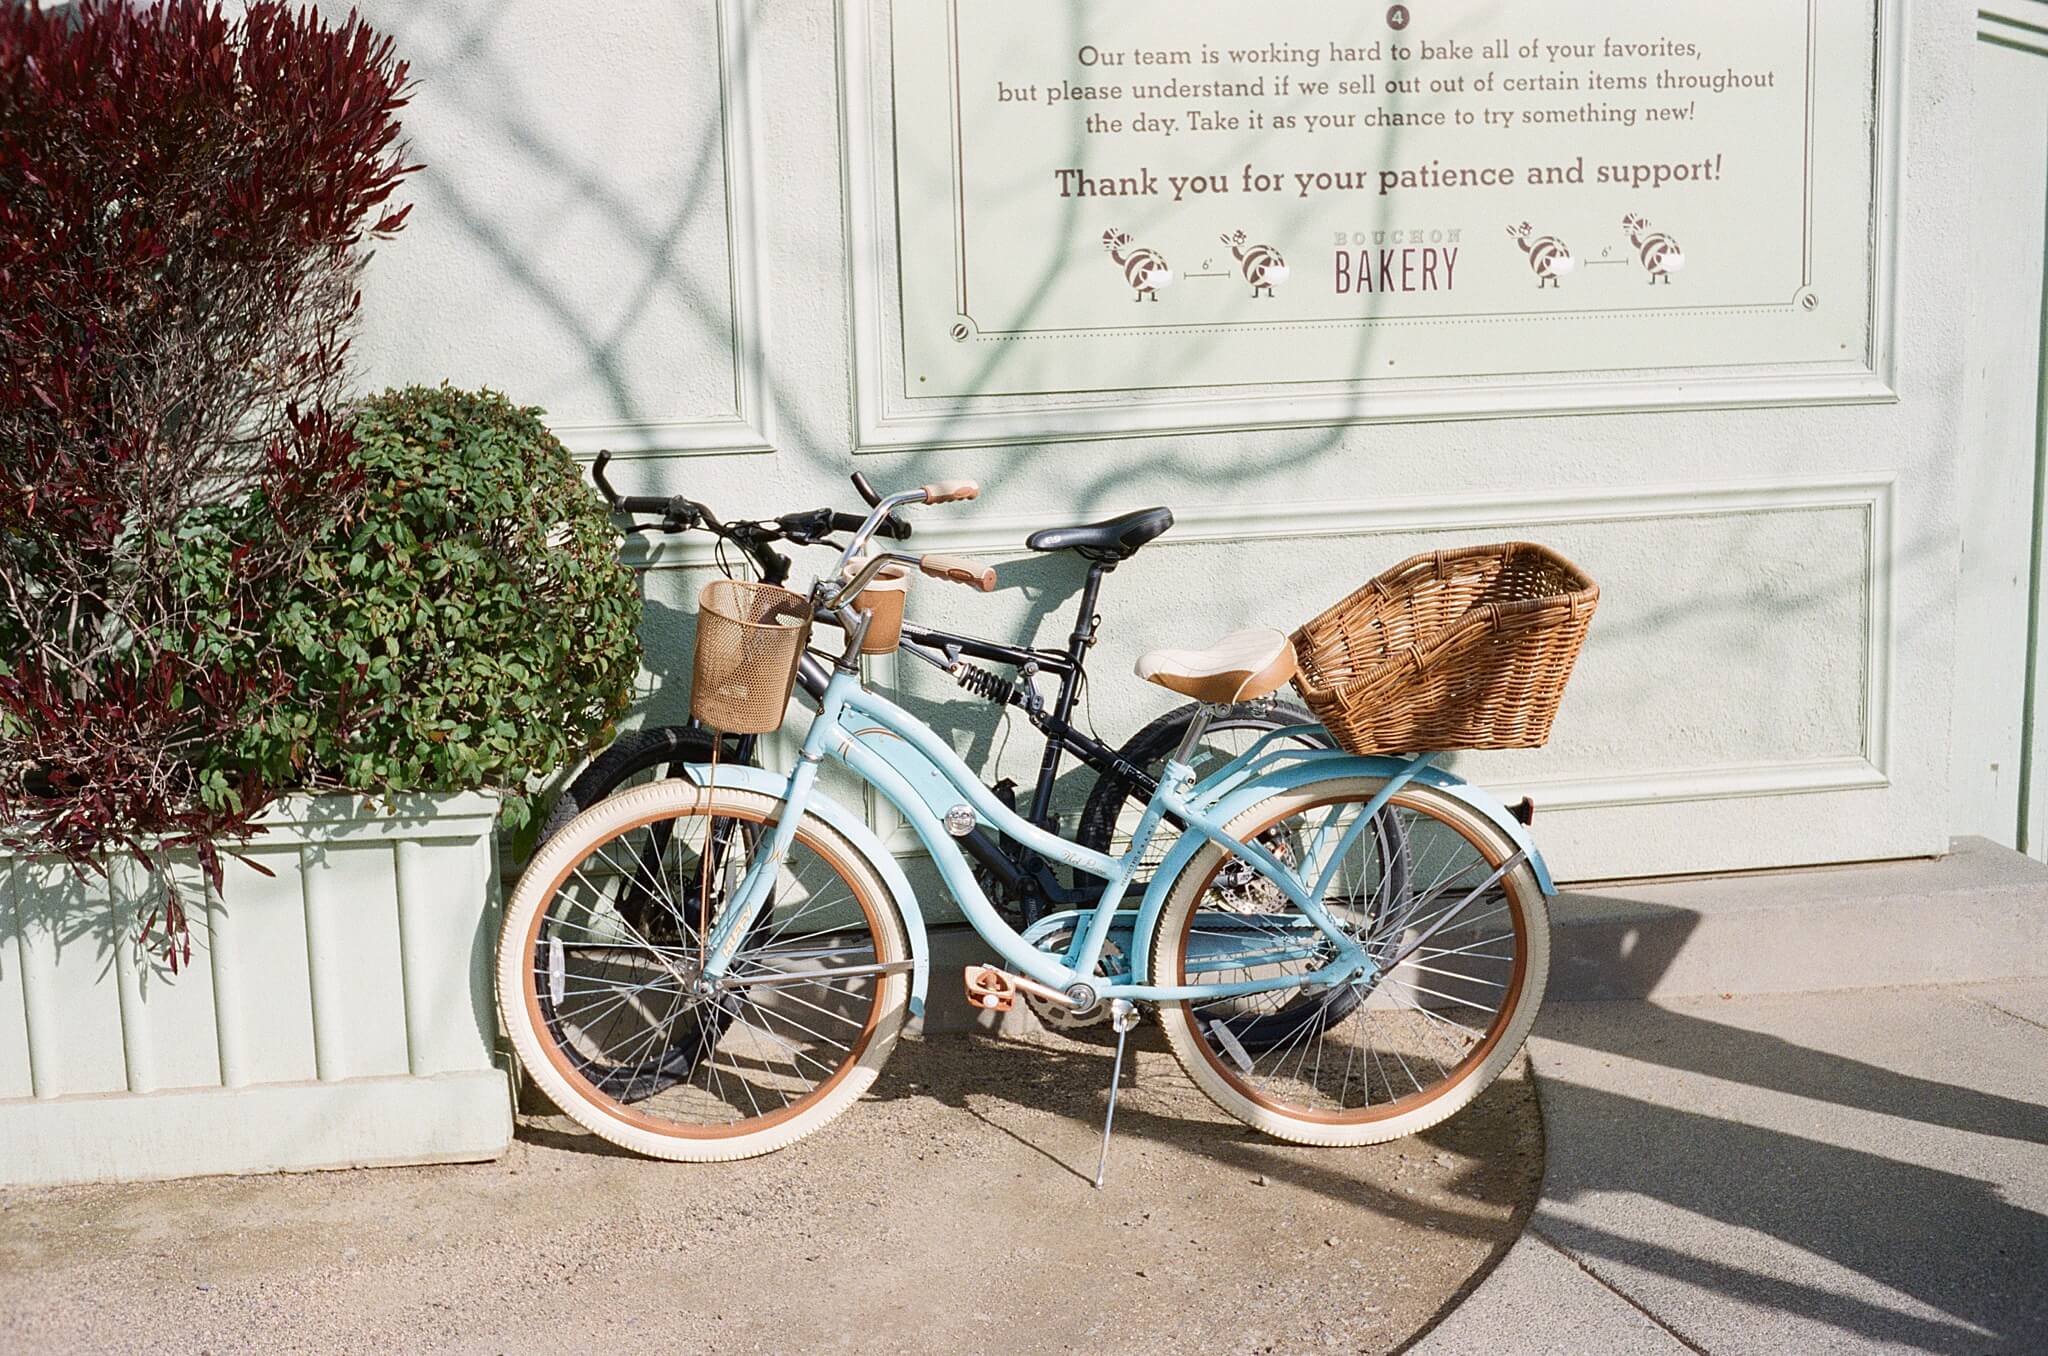 A baby-blue old-fashioned bicycle with wide handle bars and a wooden basket stands propped up in front of a pale green wall next to a topiary. The sun shines, casting shadows behind the bike.